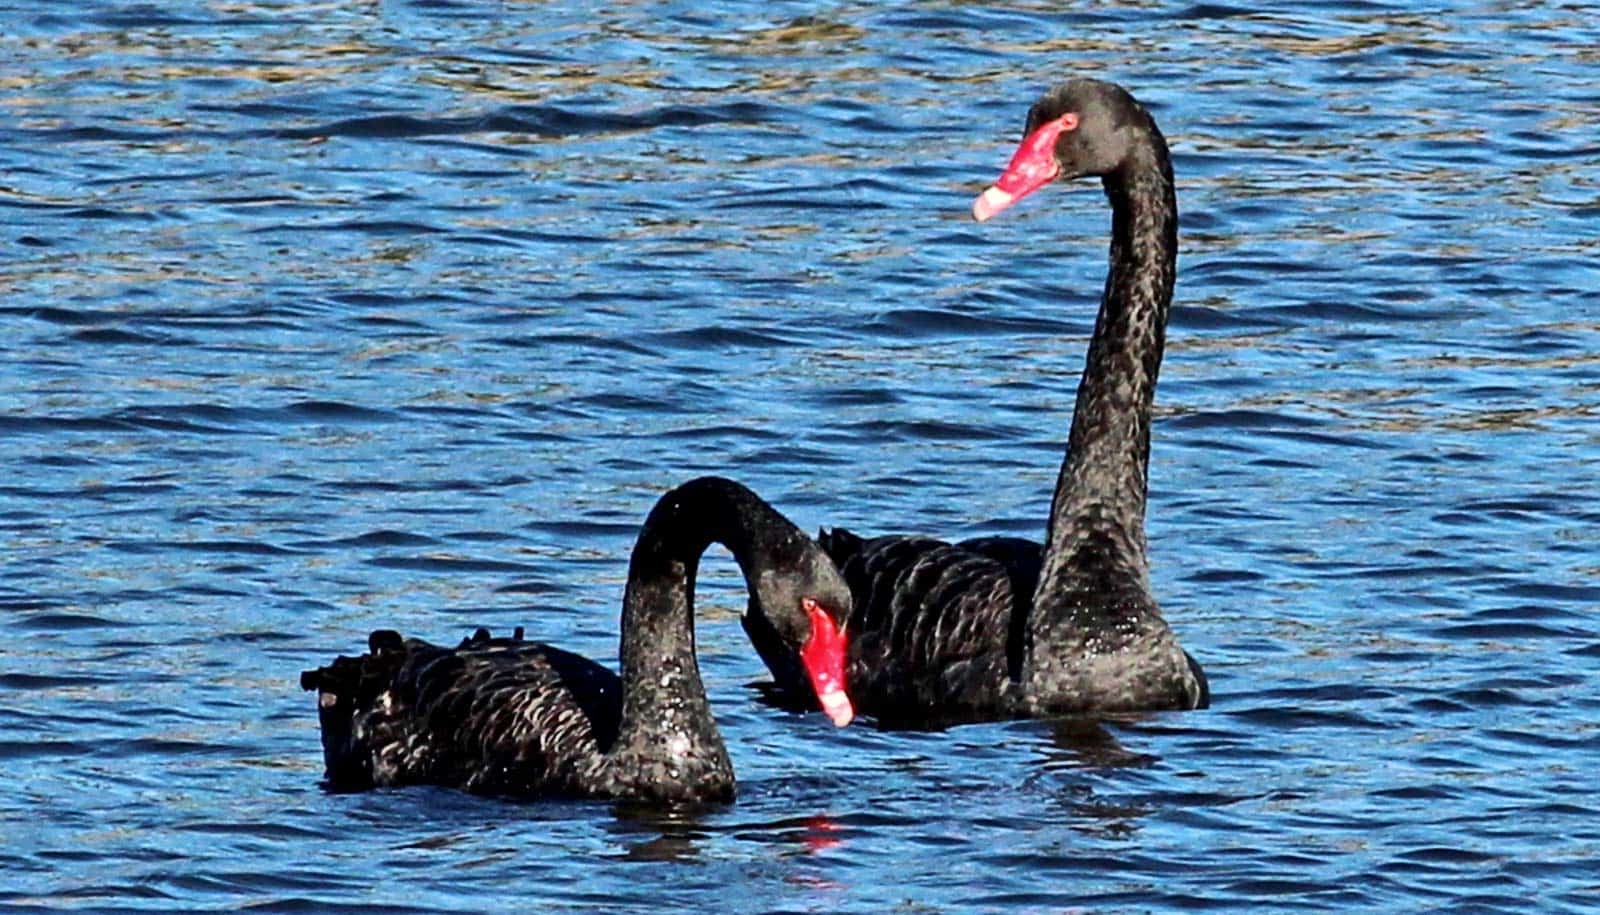 Two black swans with red beaks swim on clear blue water.